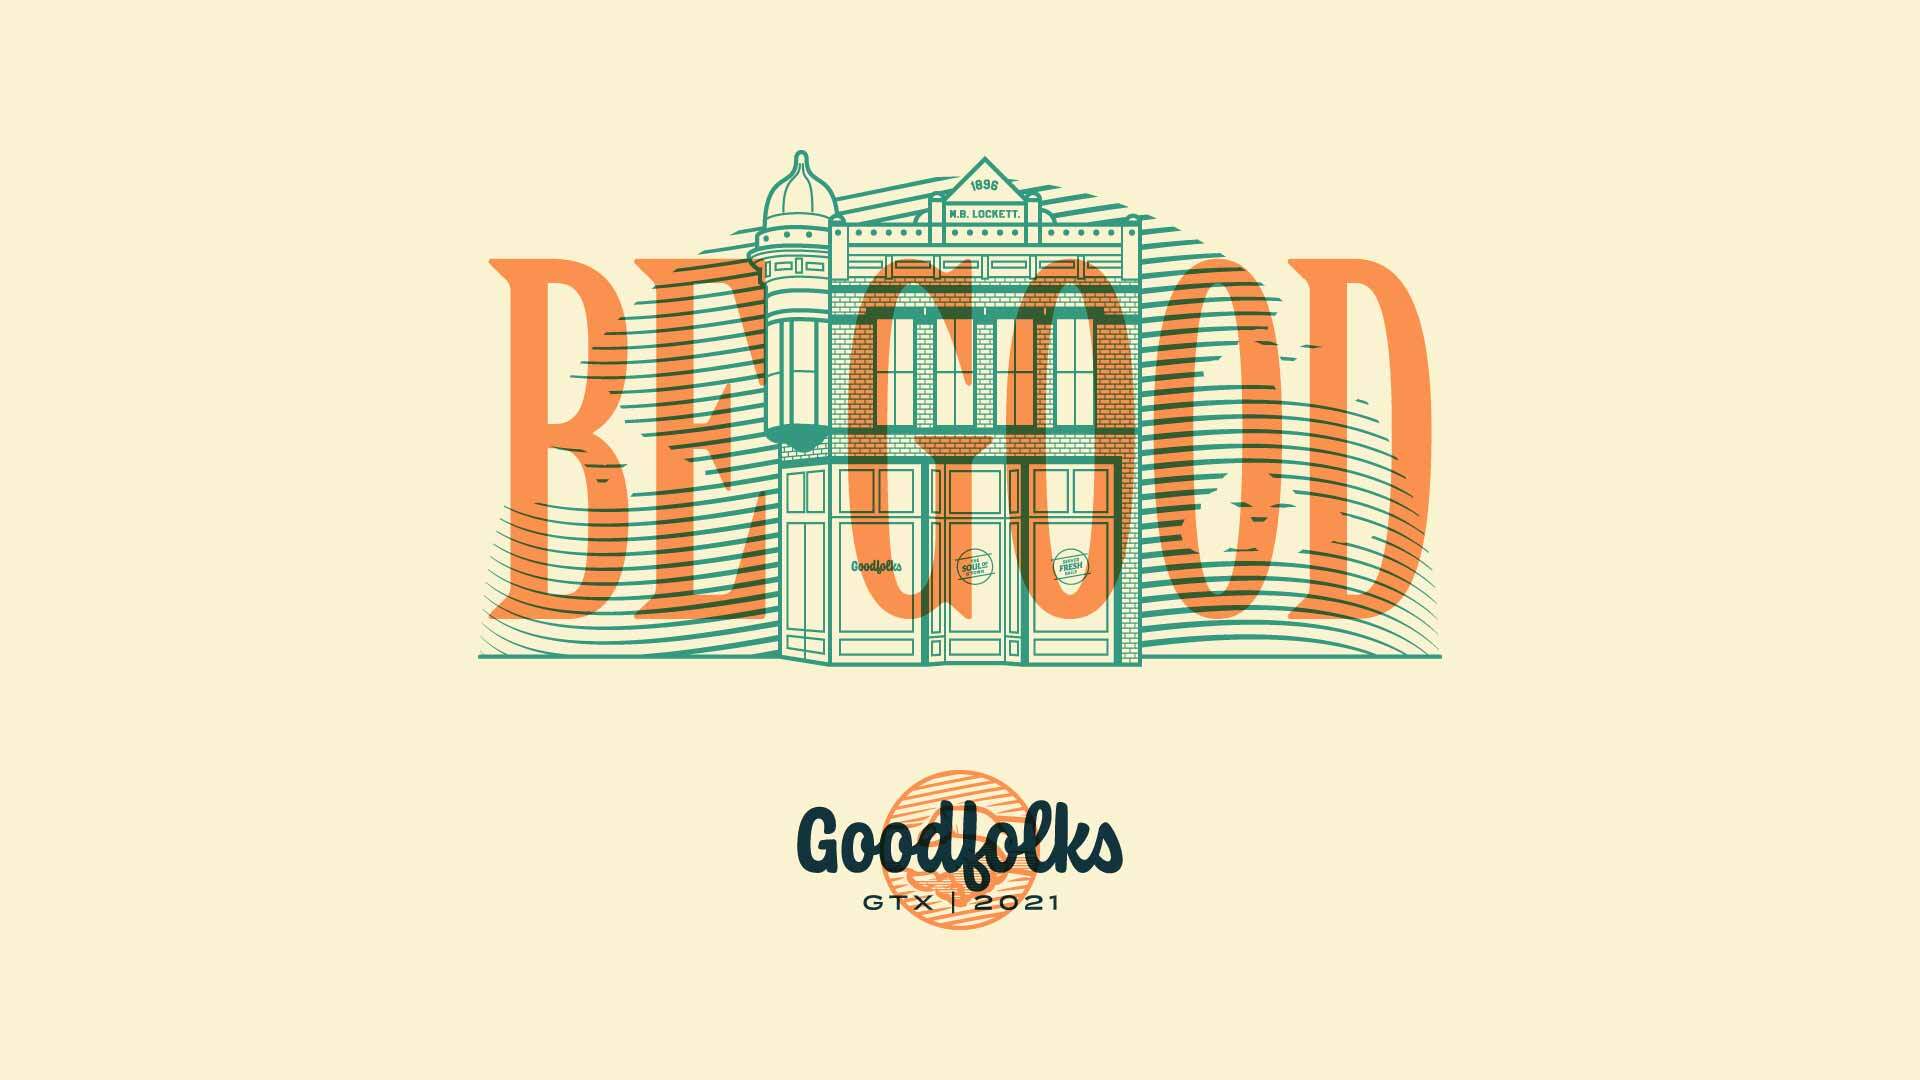 Branding design illustration of the EB Lockett building in Georgetown, Texas created for Goodfolks by Tilted Chair reading "BE GOOD"